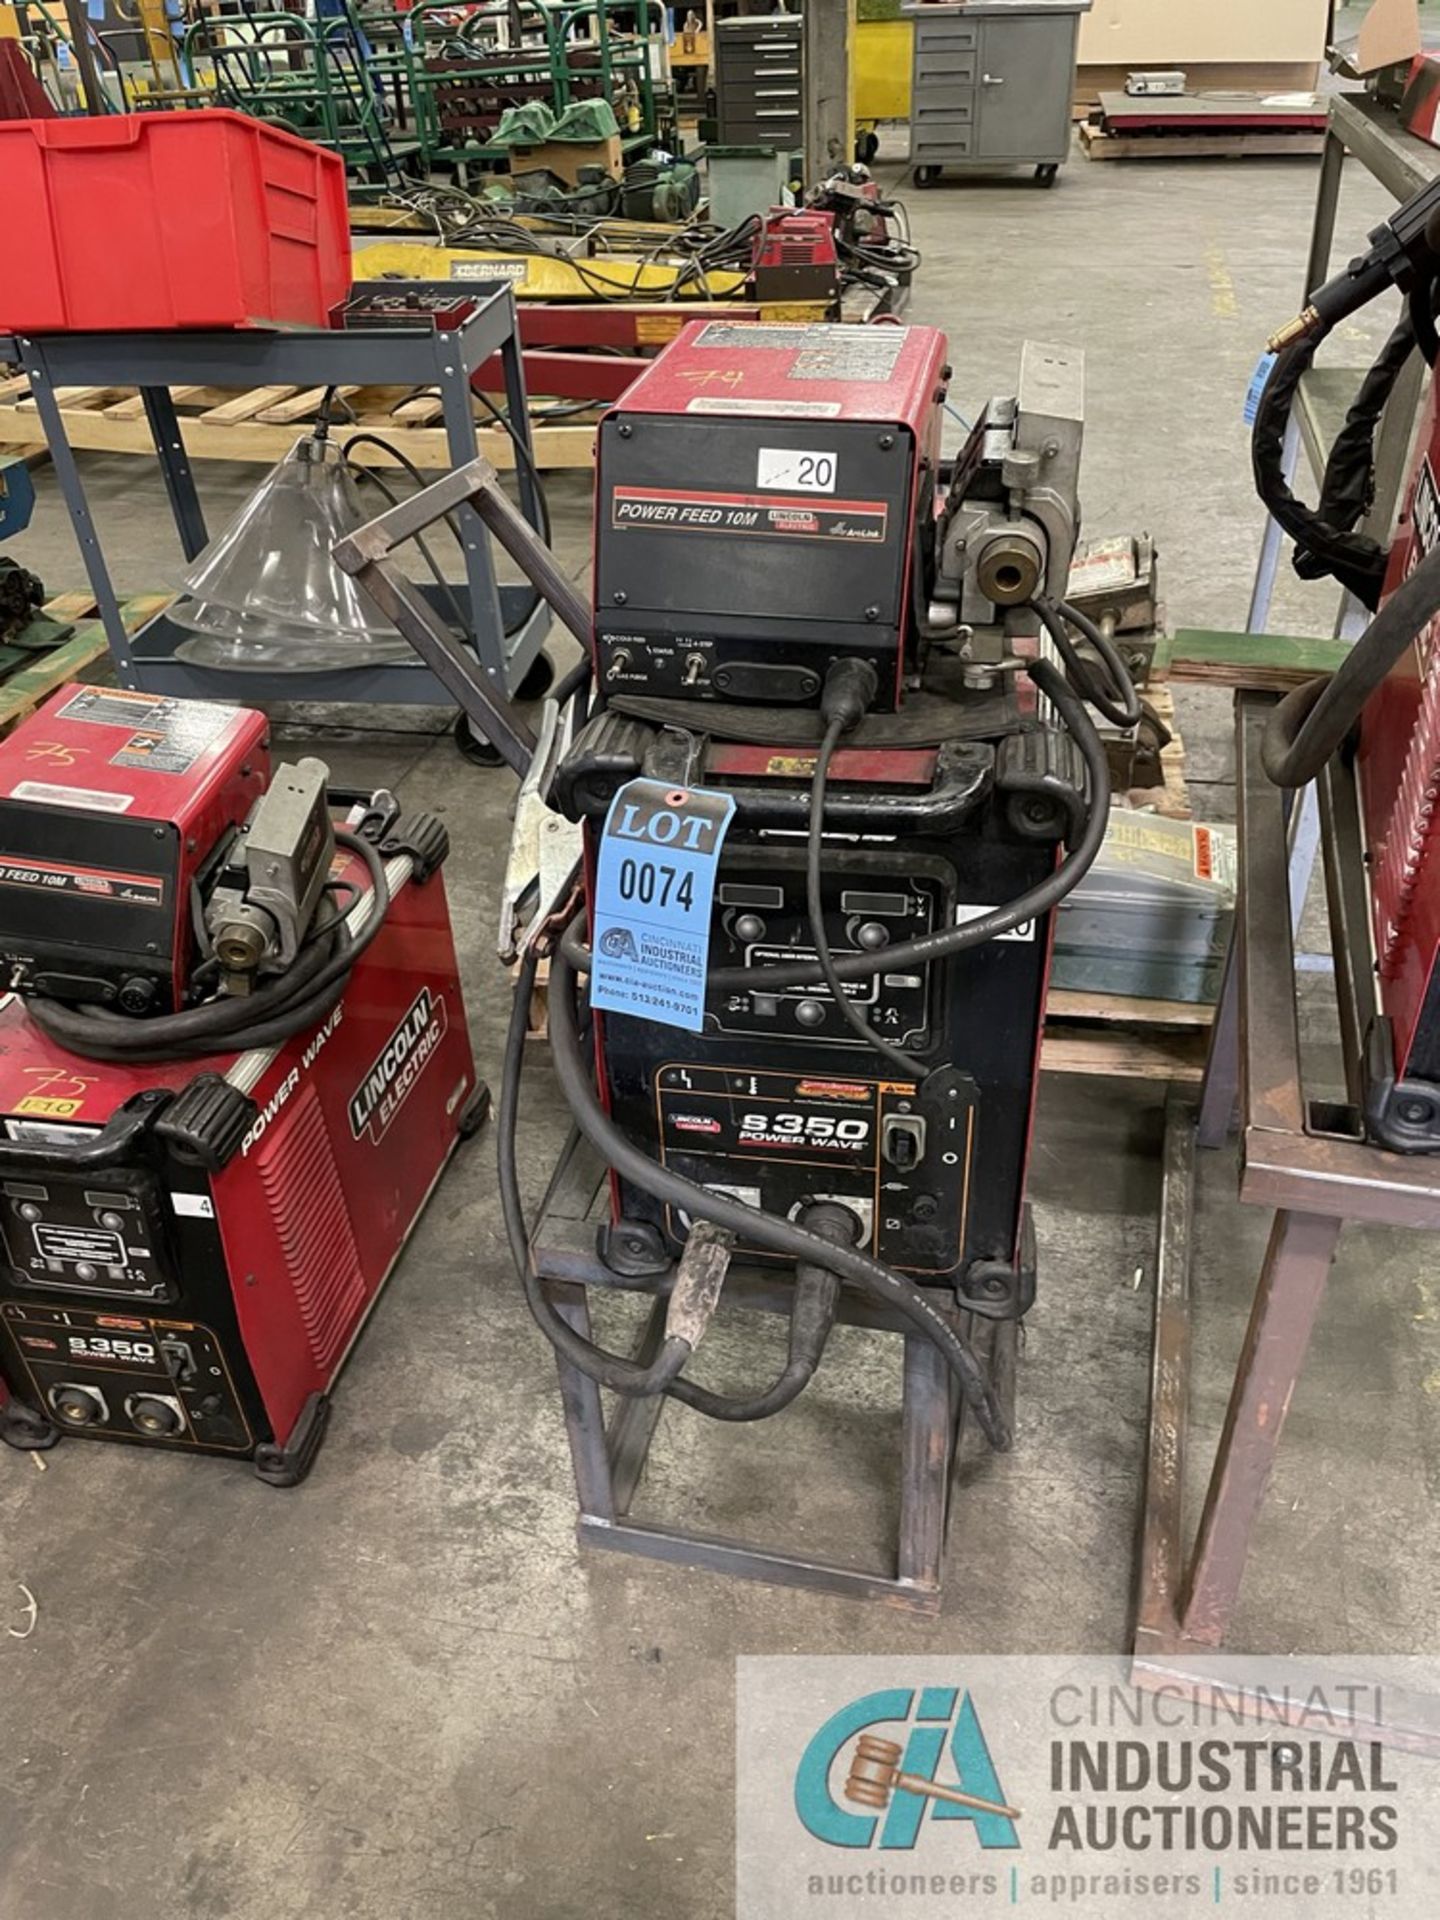 350 AMP LINCOLN S350 POWER WAVE ADVANCED PROCESS WELDER S/N N/A WITH POWER FEED 10M WIRE FEEDER